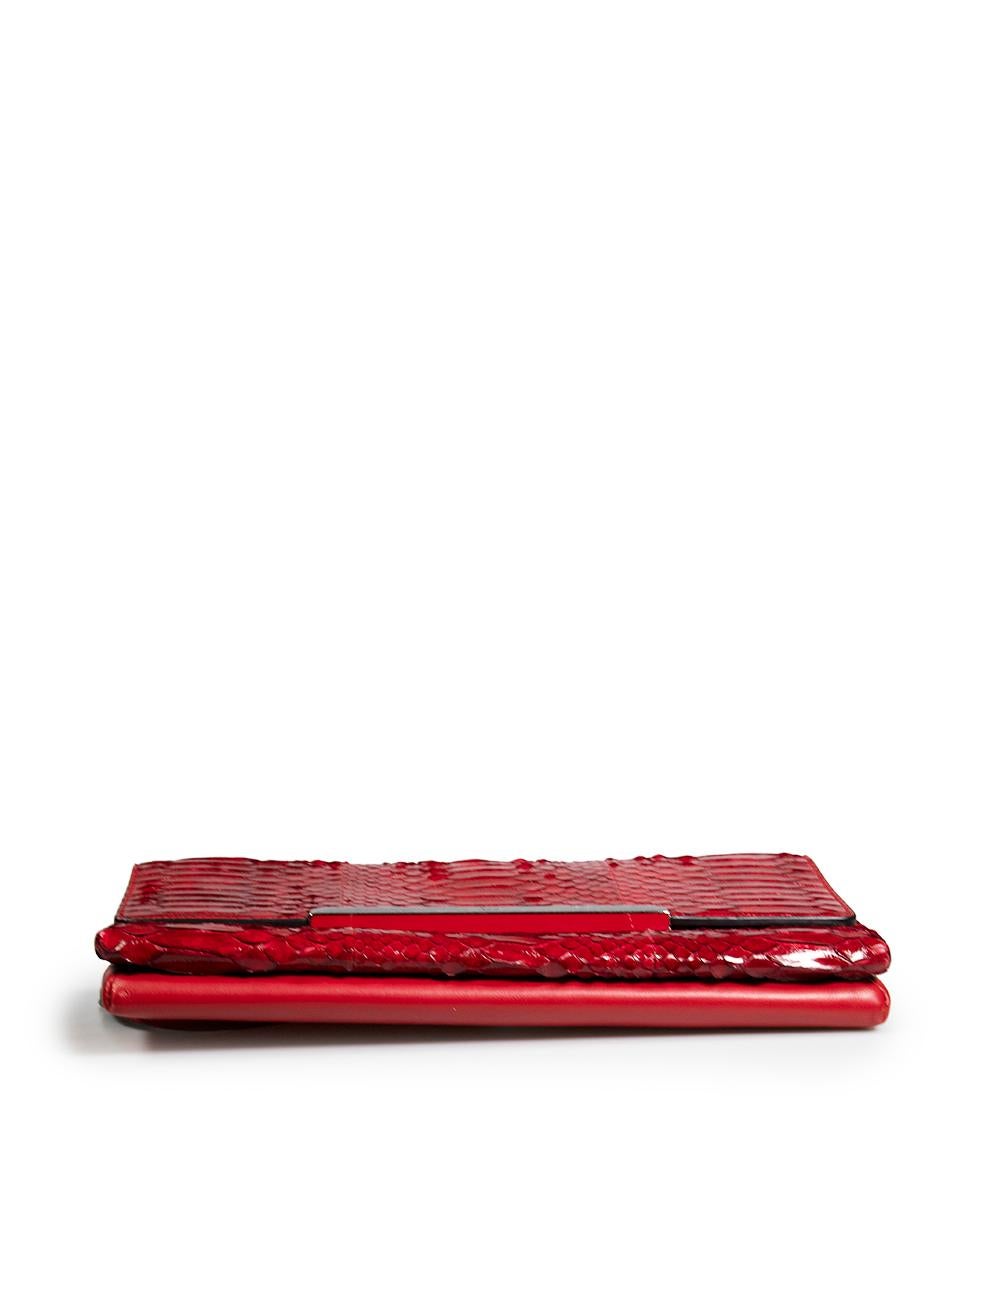 Women's Christian Louboutin Red Python Rougissime Clutch Bag For Sale